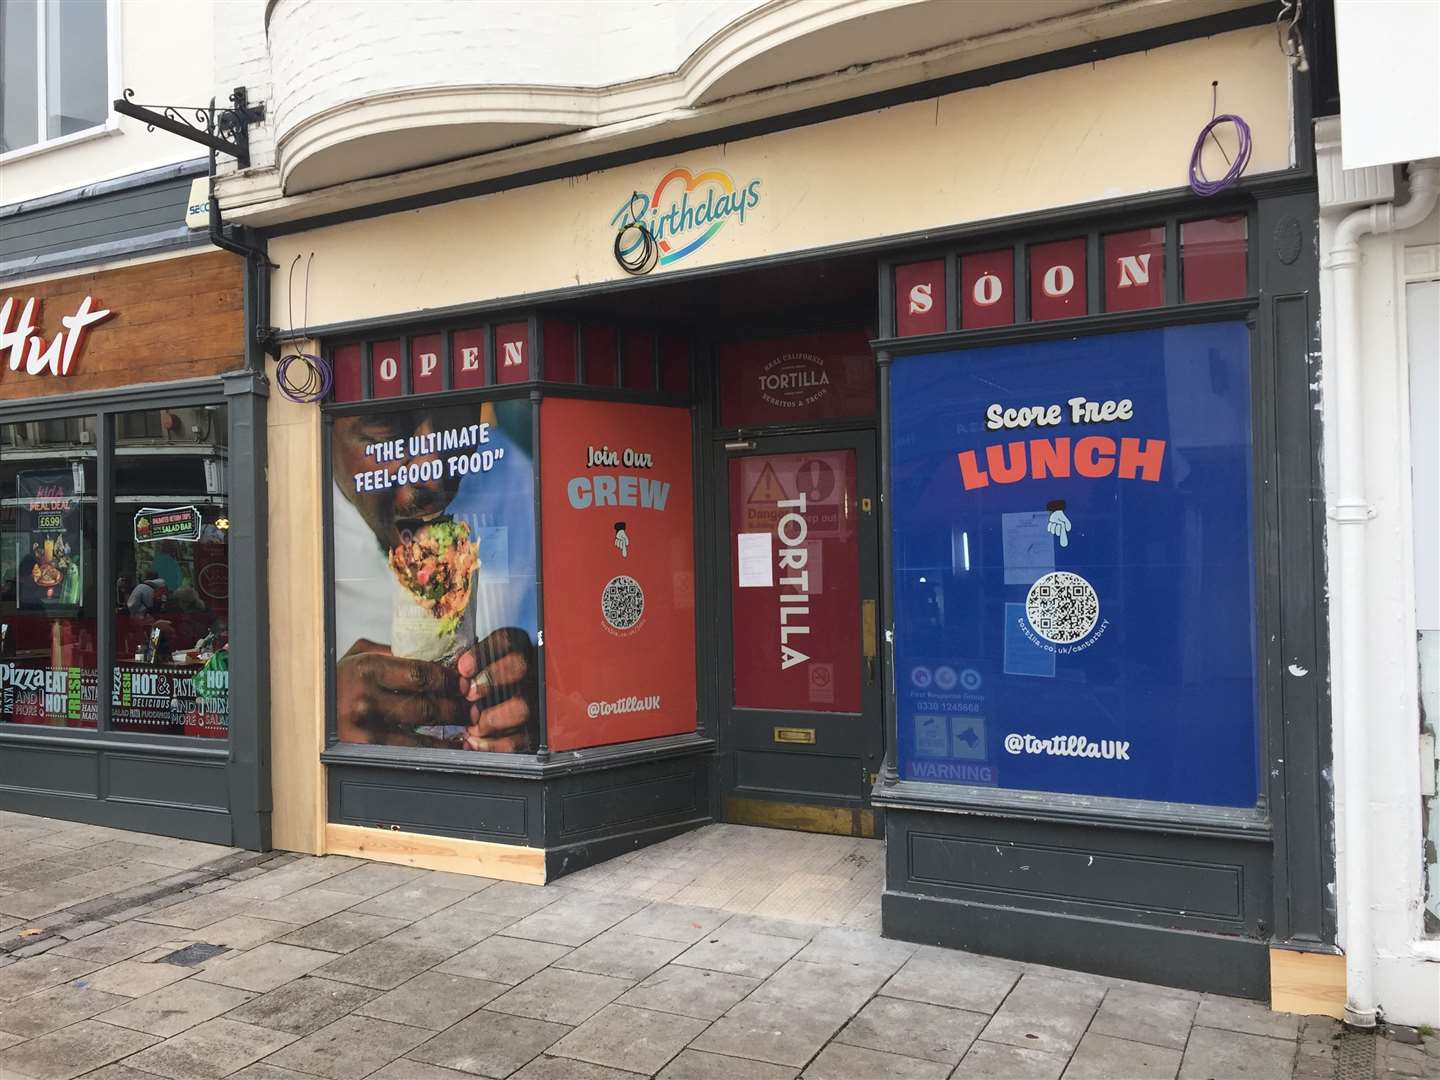 The high street unit will open as a restaurant in November